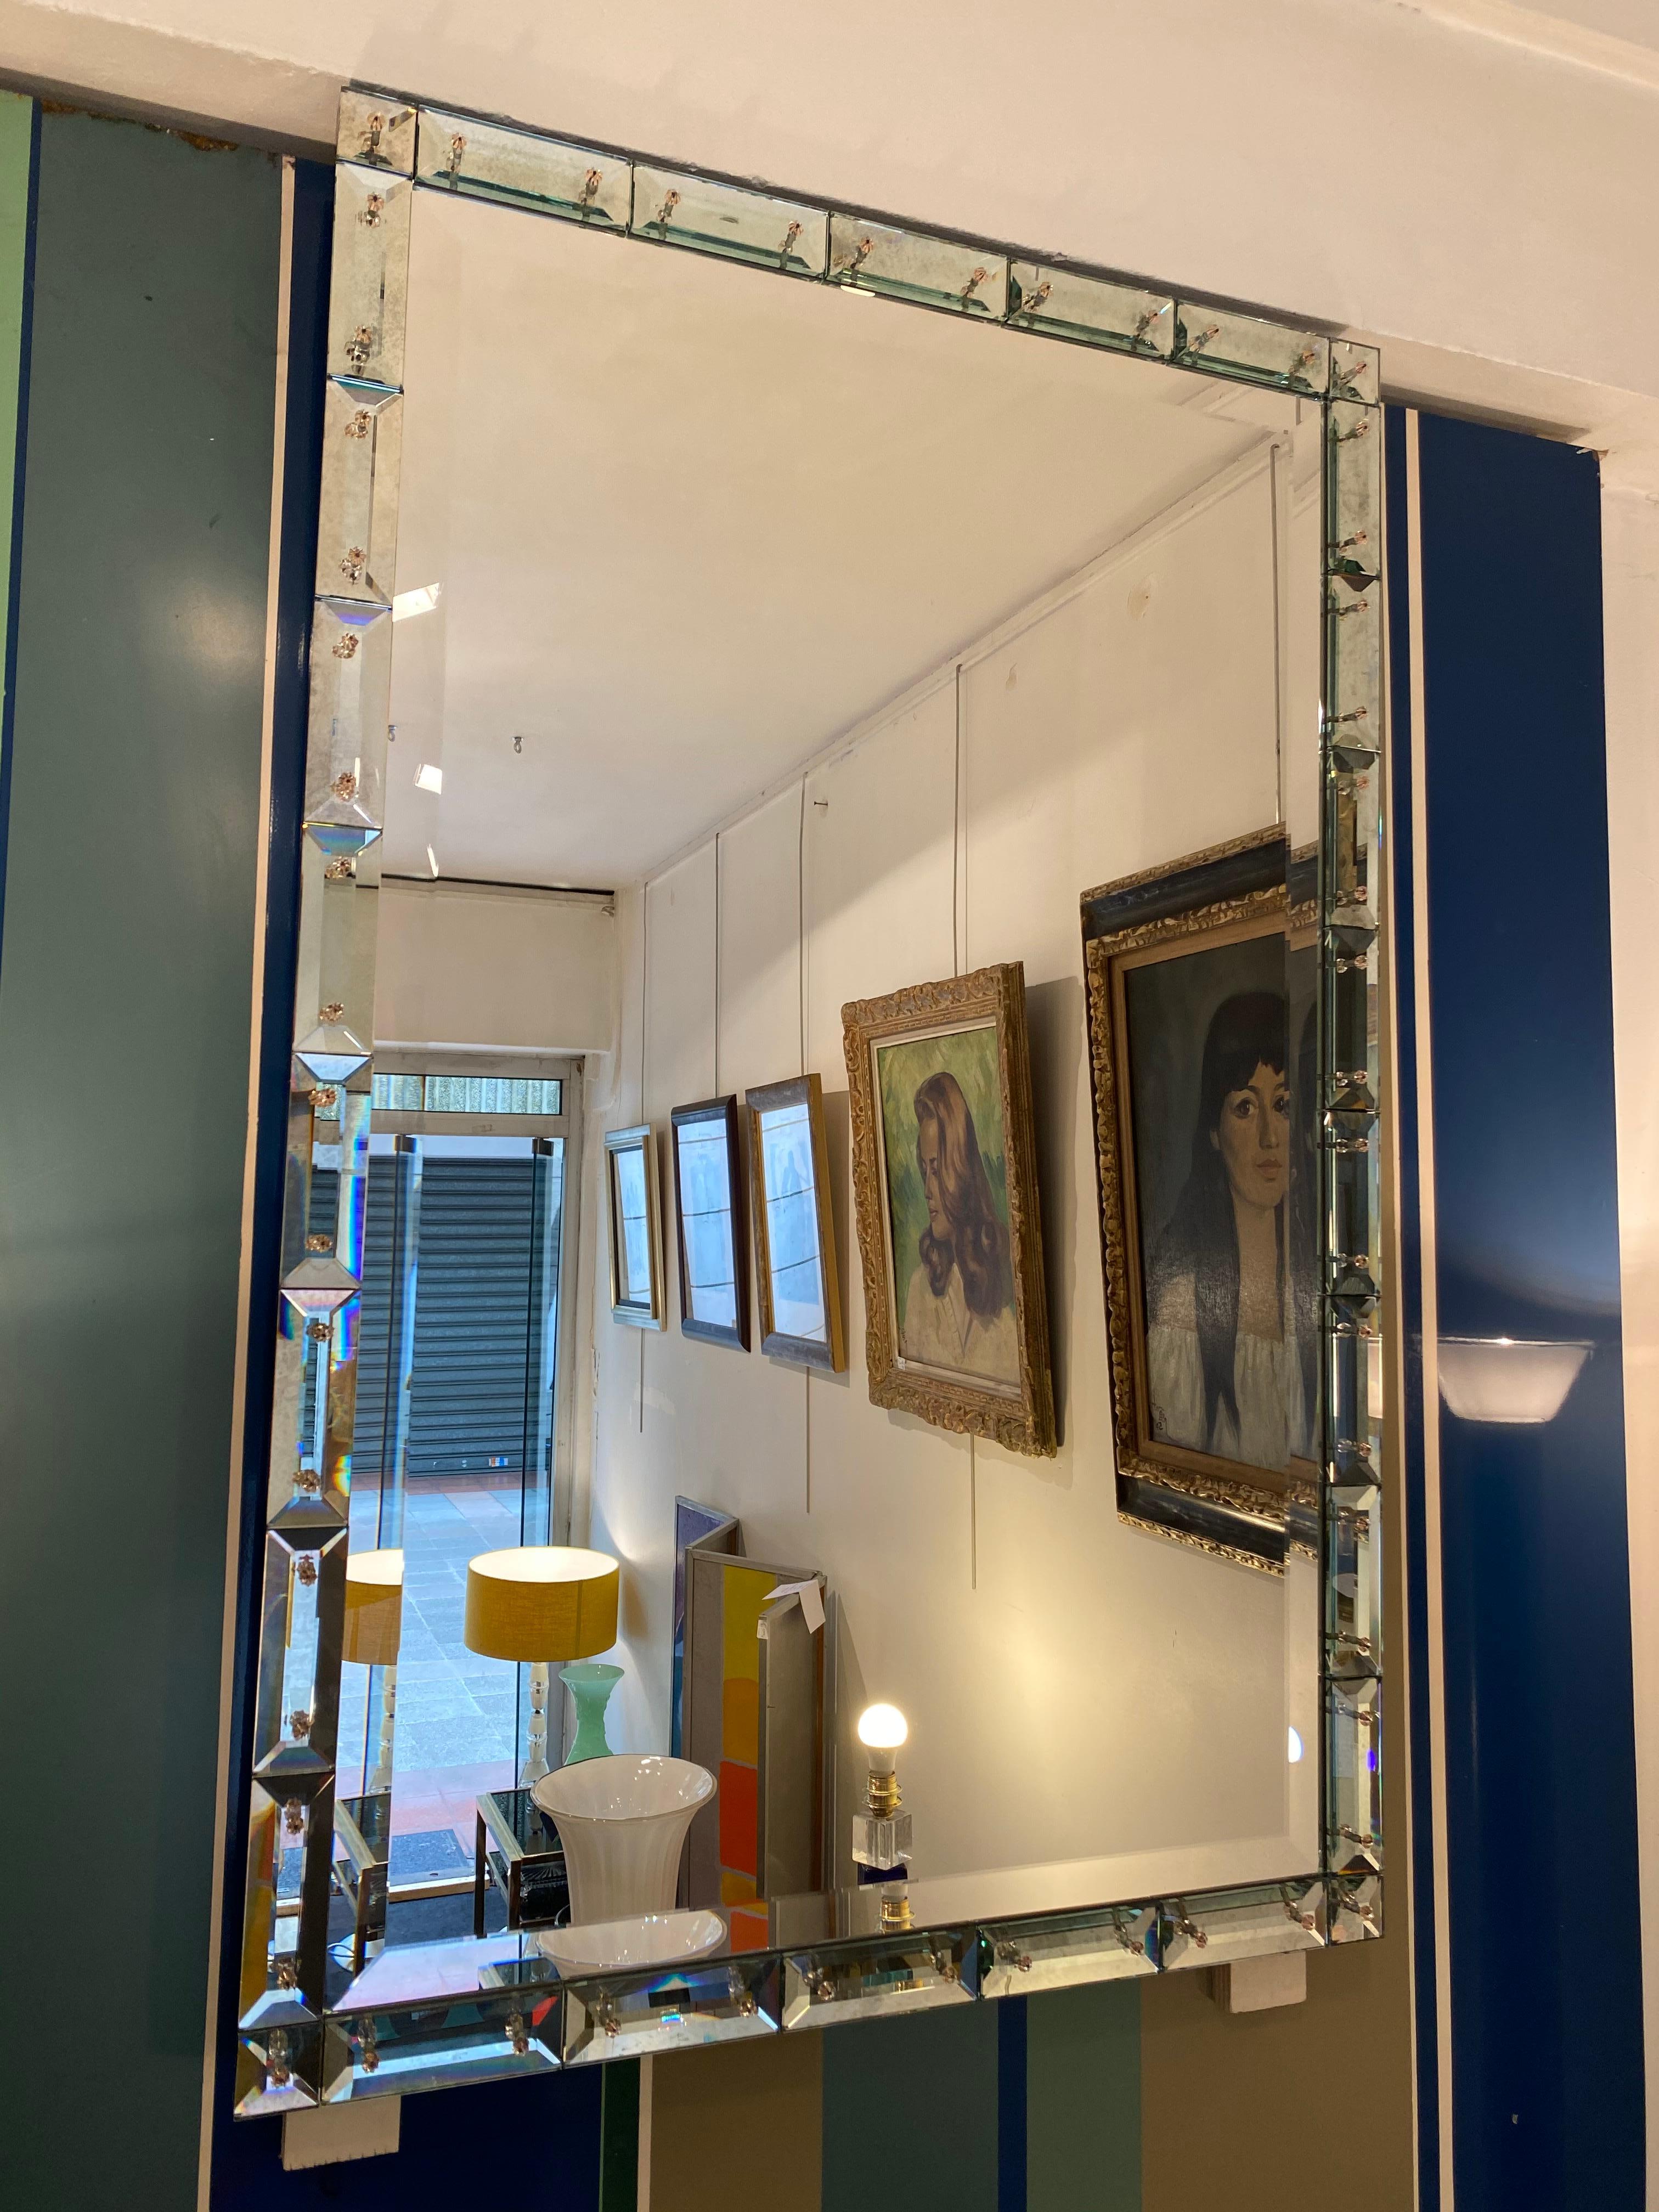 Murano mirror
Murano on wooden frame
Cut Murano rim
Horizontal or vertical
Perfect condition,
circa 1980
Measures: 105 x 69 x 4 cms
2,500 euros

Founded in 1859, Salviati sits amongst the most prestigious glass manufacturers in Venice. Over